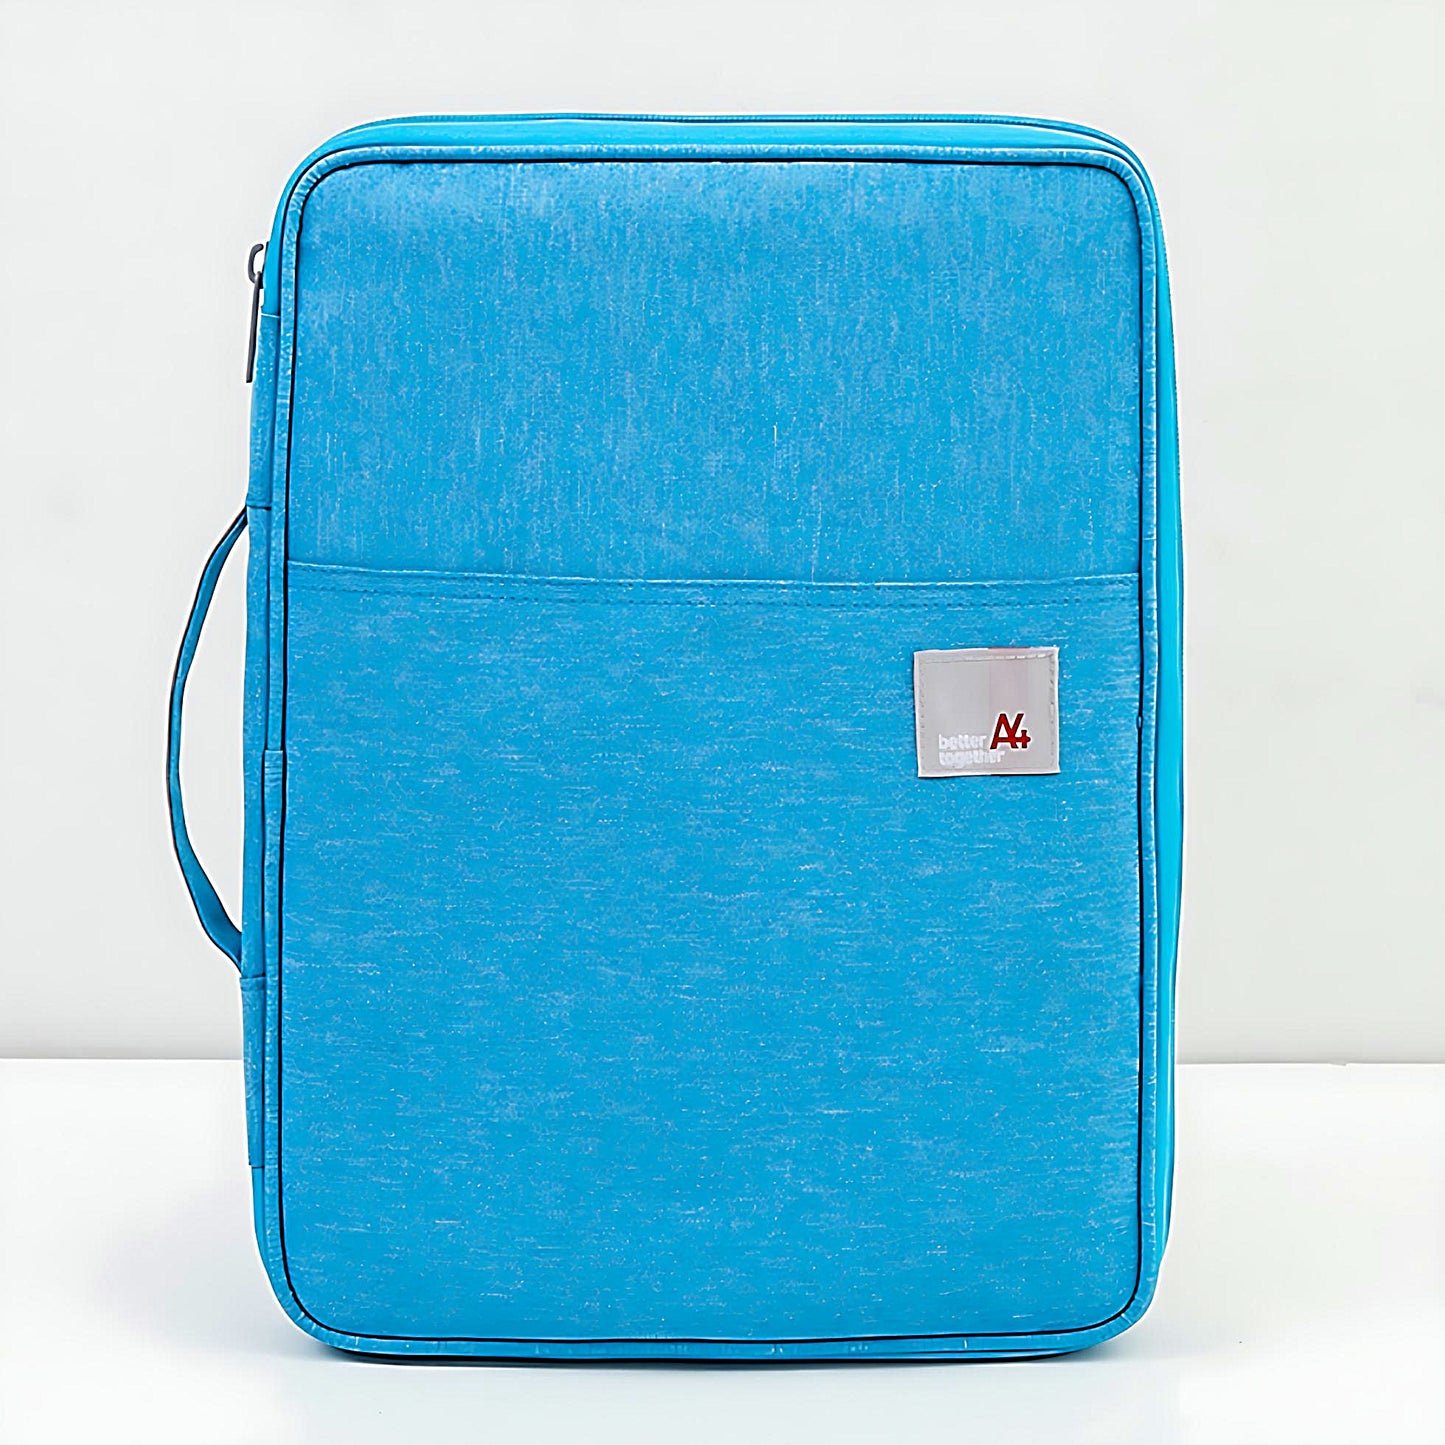 a laptop briefcase in blue color on a white background